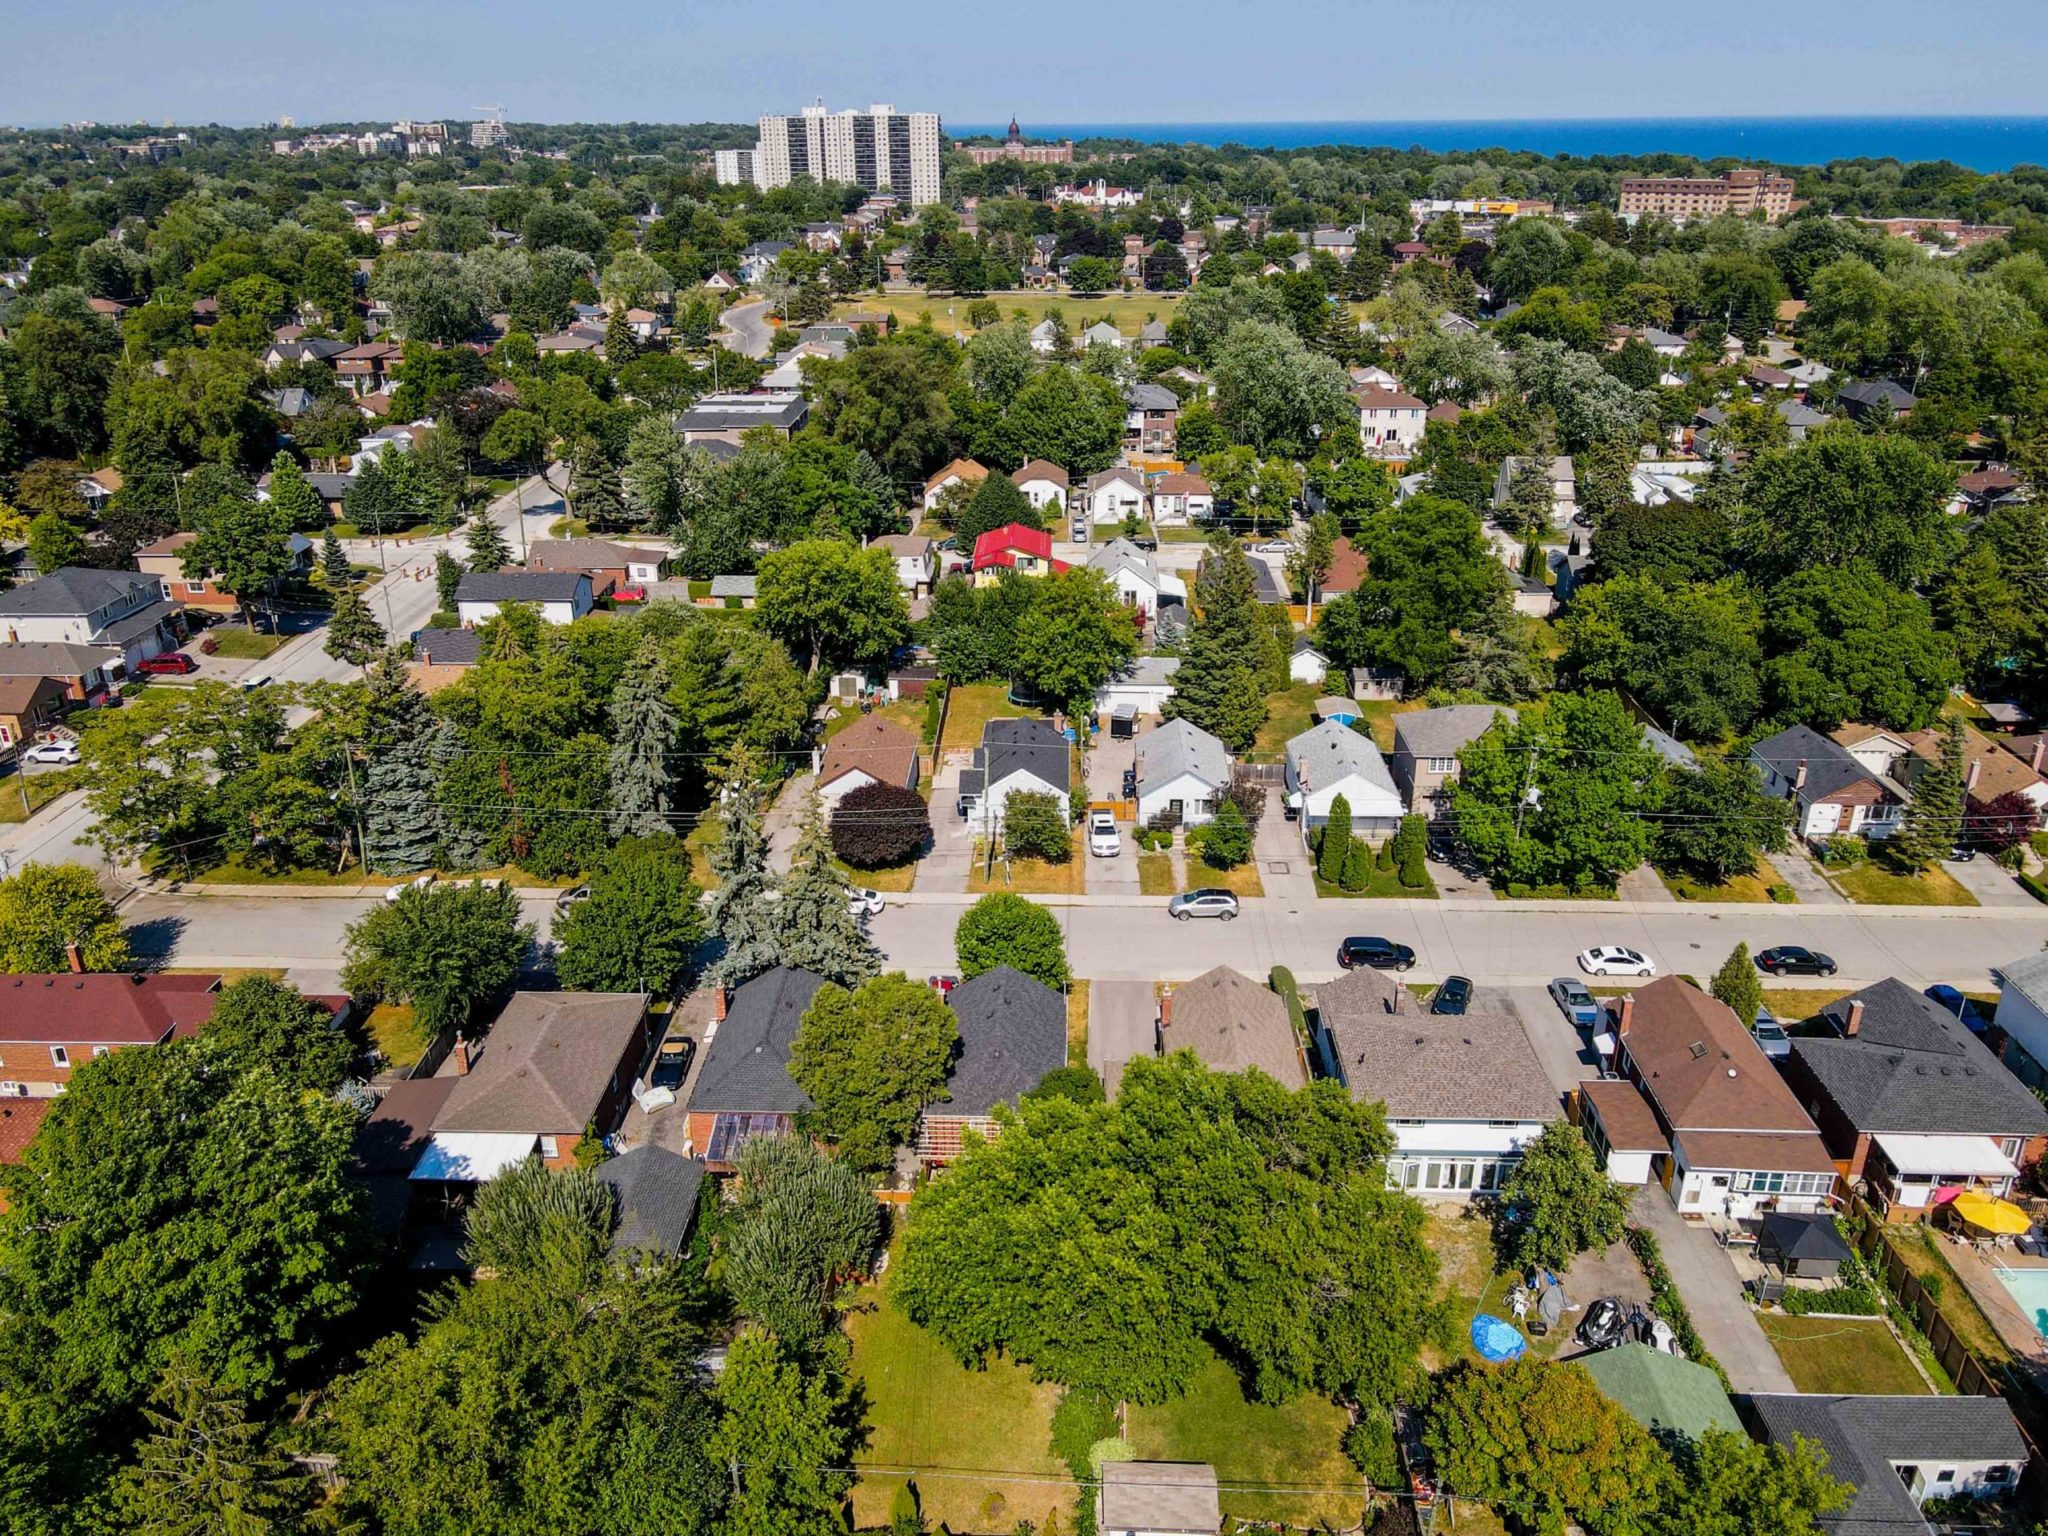 Aerial view of houses, trees and streets of Birchcliffe-Cliffside, a suburb of Scarborough, Toronto.